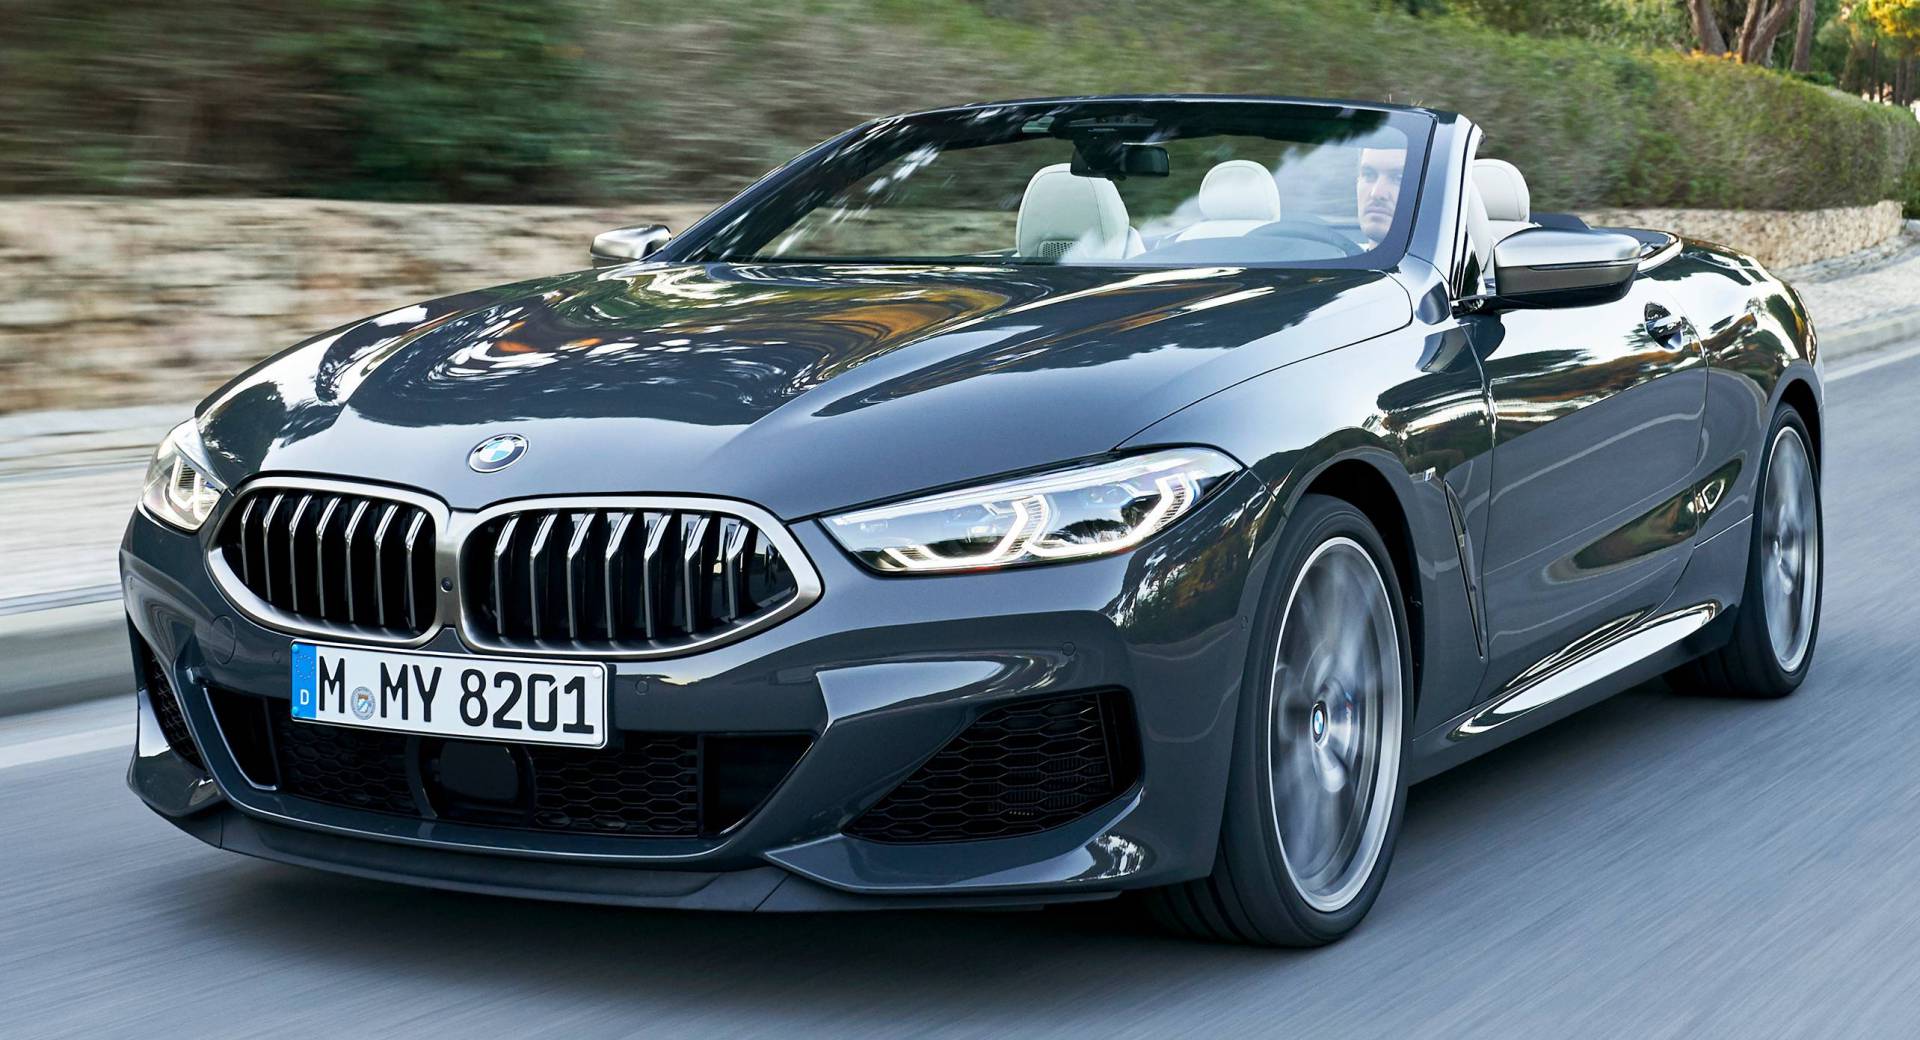 Get To Know The 2019 Bmw 8 Series Convertible In 98 New Photos Carscoops